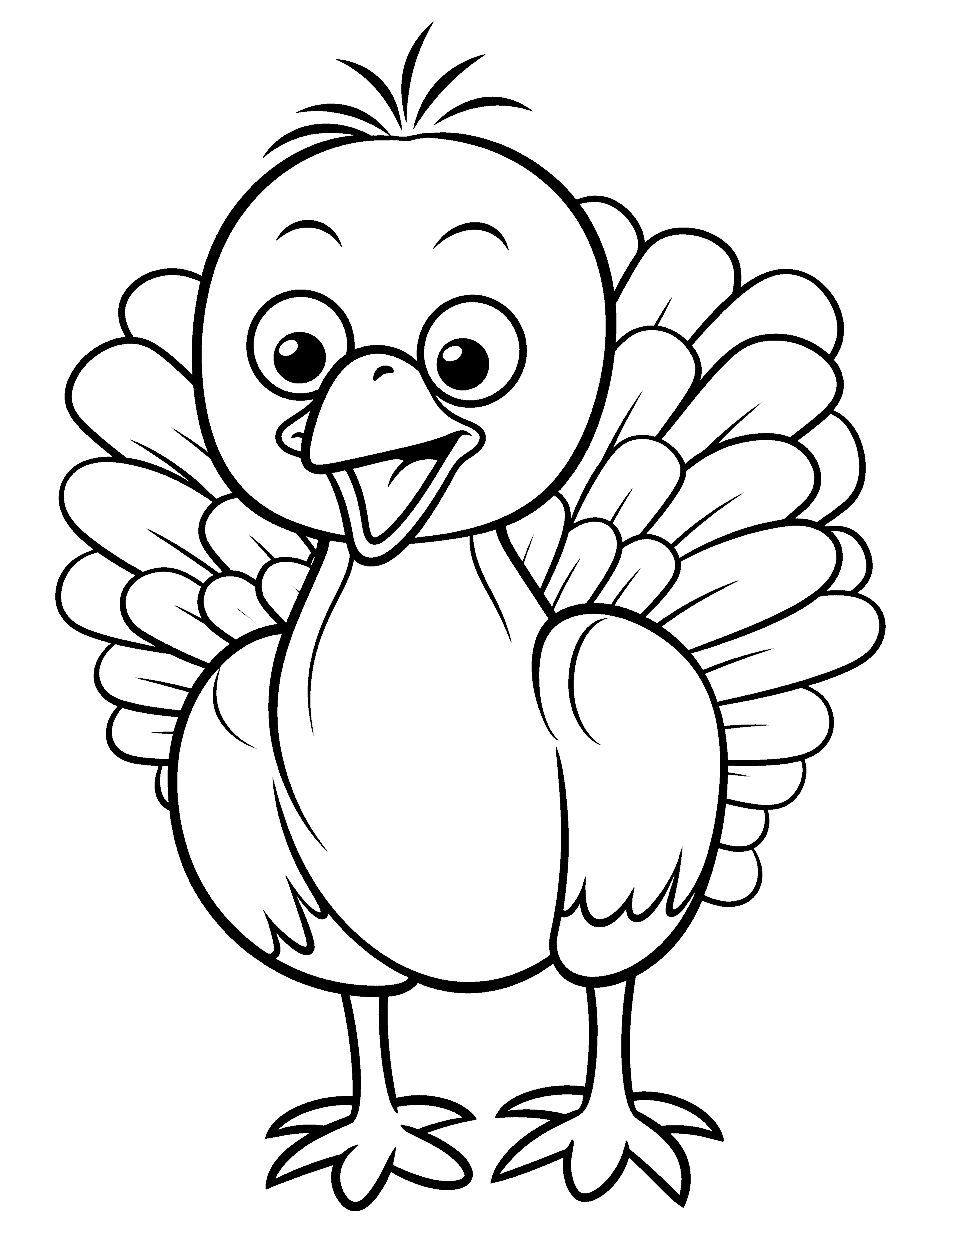 Cheerful Baby Turkey Coloring Page - A cute and small baby turkey with big, bright eyes, perfect for preschool coloring activity.